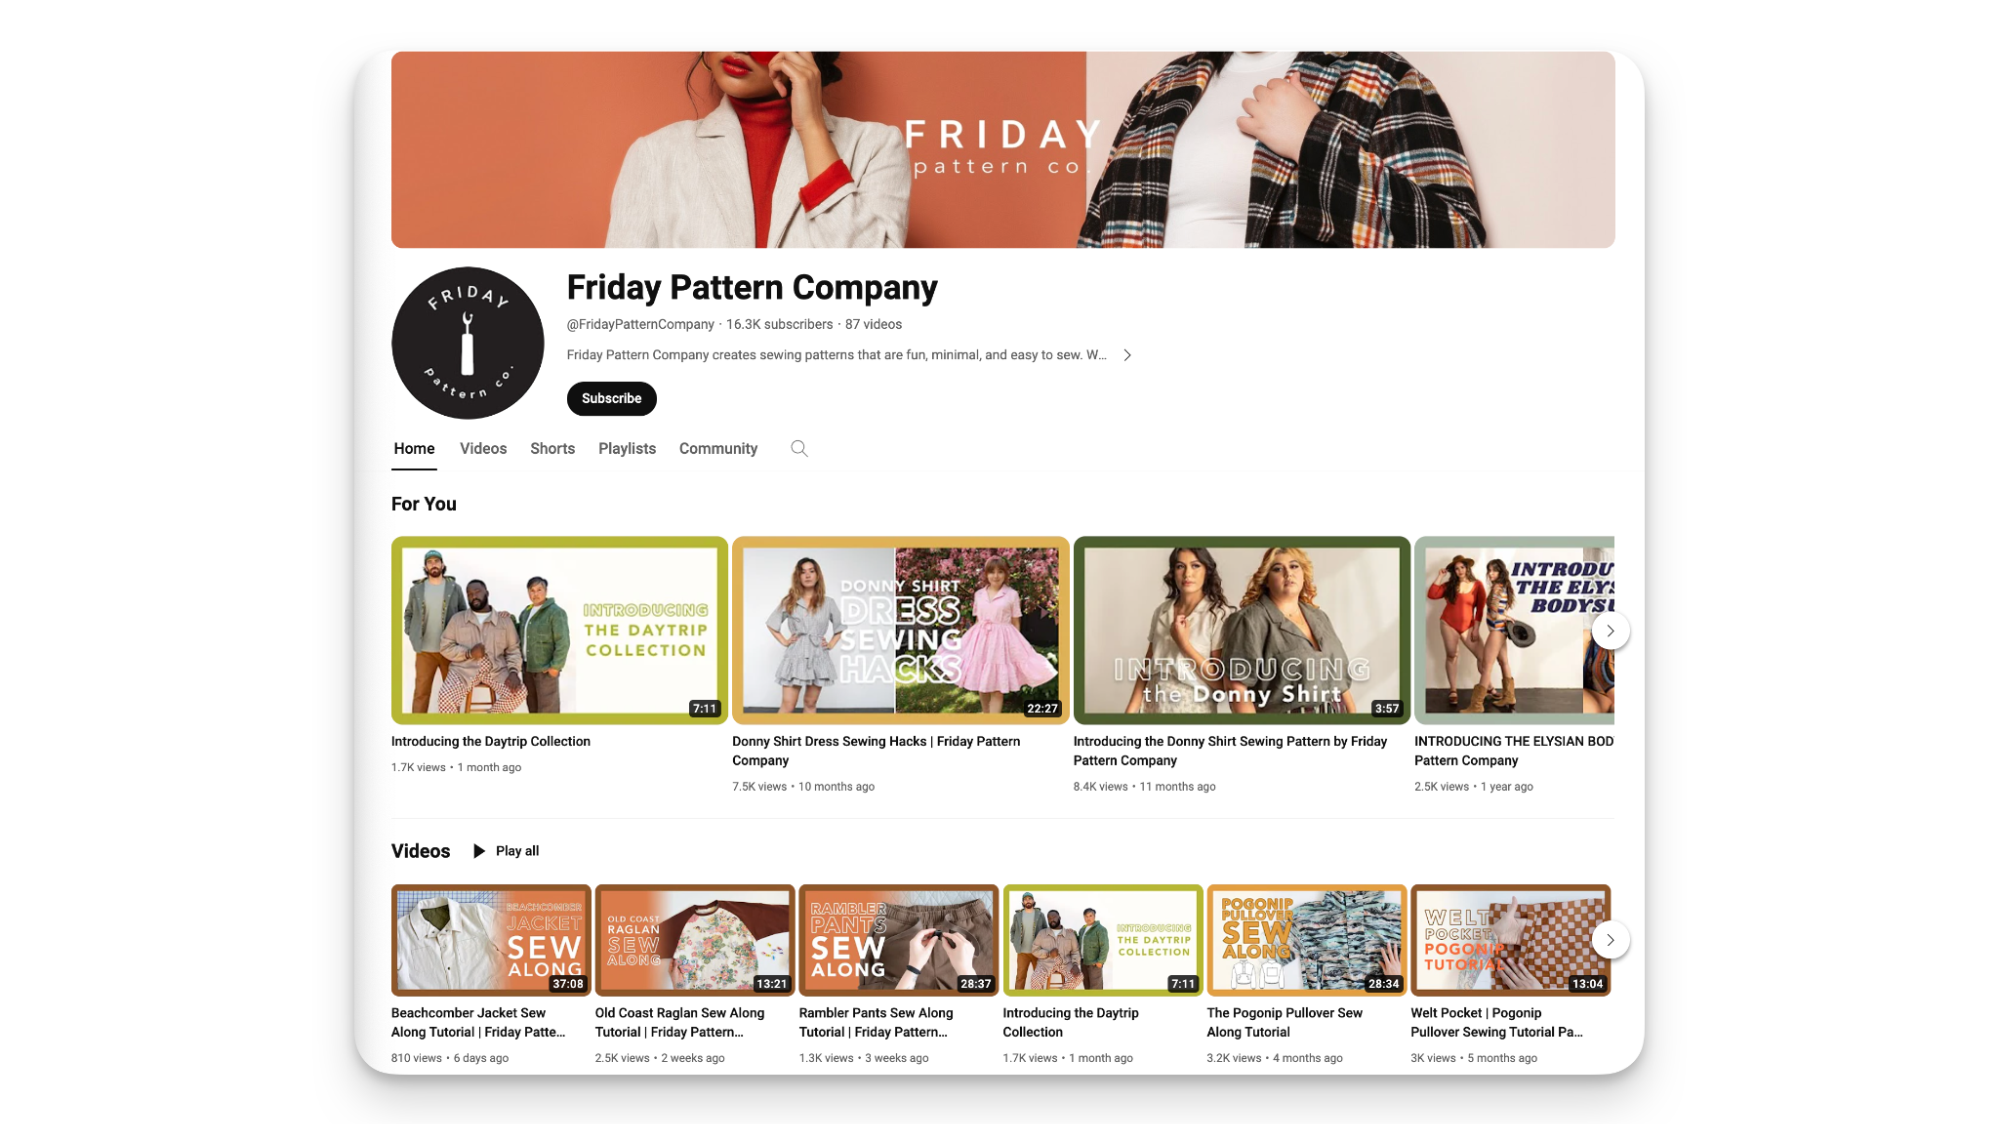 Screenshot of Friday Pattern Company’s YouTube channel page with two rows of videos